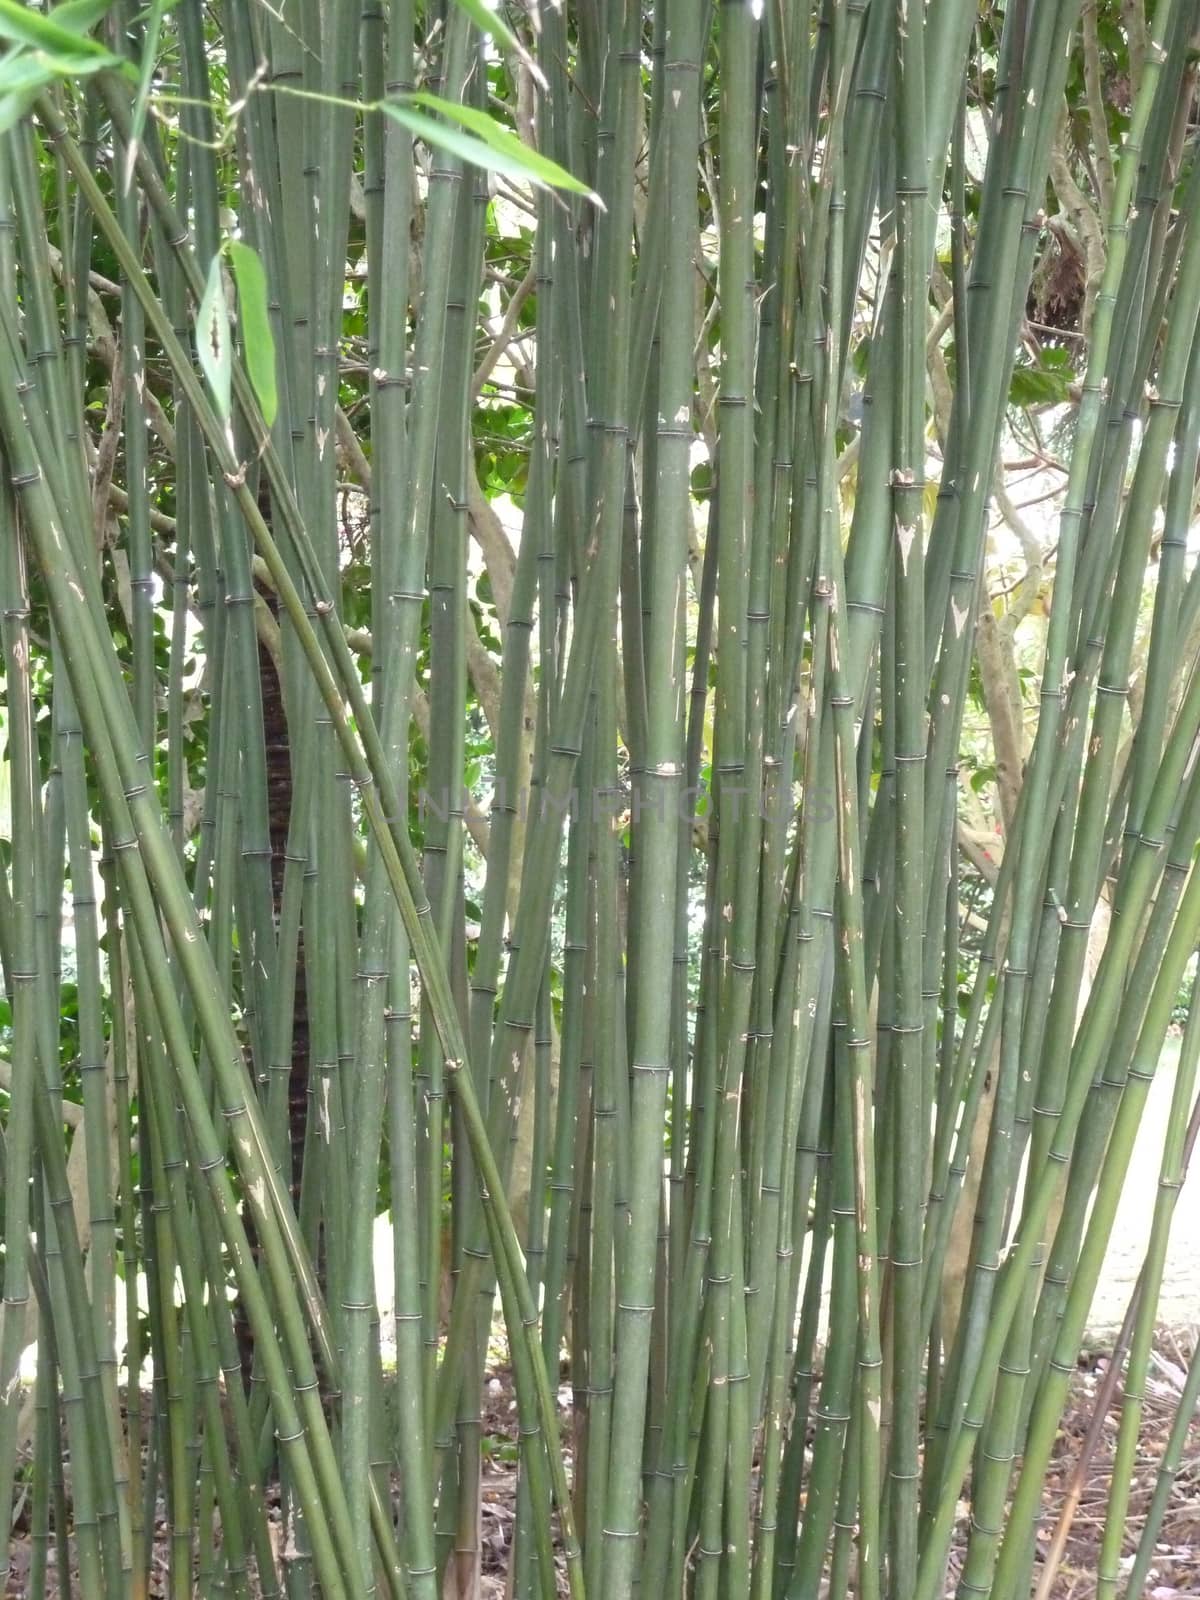 Bright strong green bamboo stalks close together